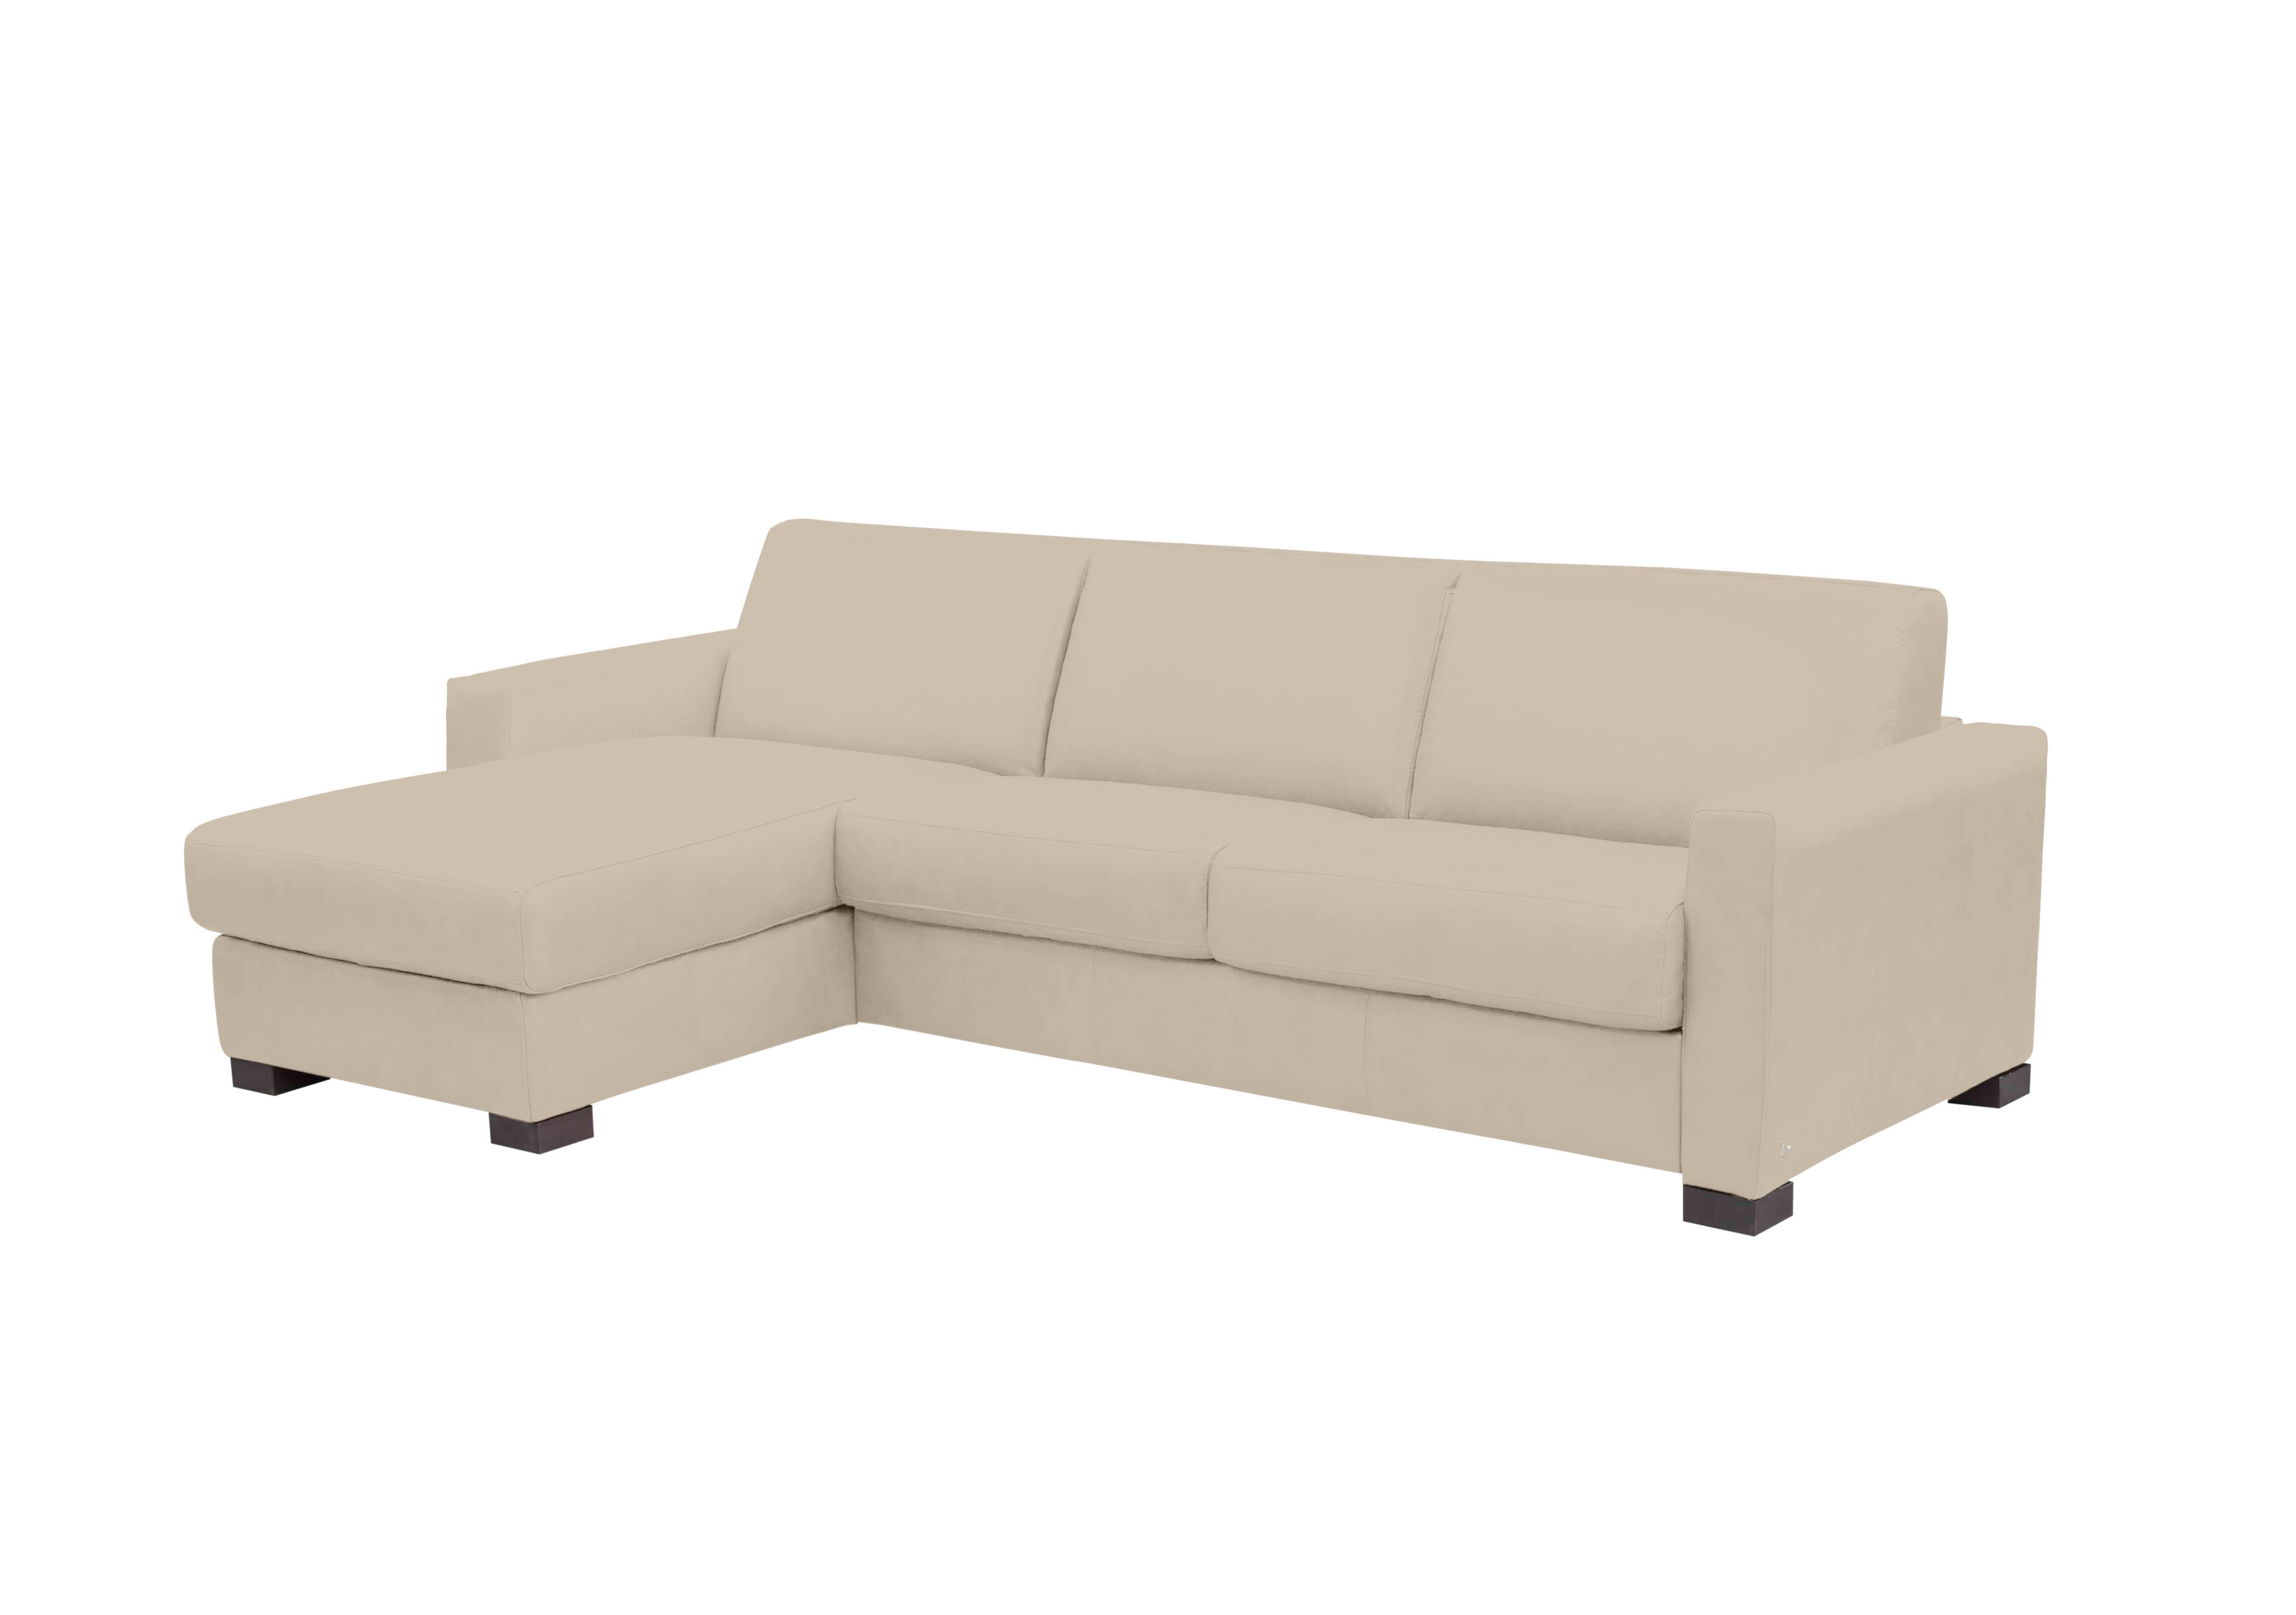 Alcova 3 Seater Leather Sofa Bed with Storage Chaise and Box Arms in Botero Crema 2156 on Furniture Village